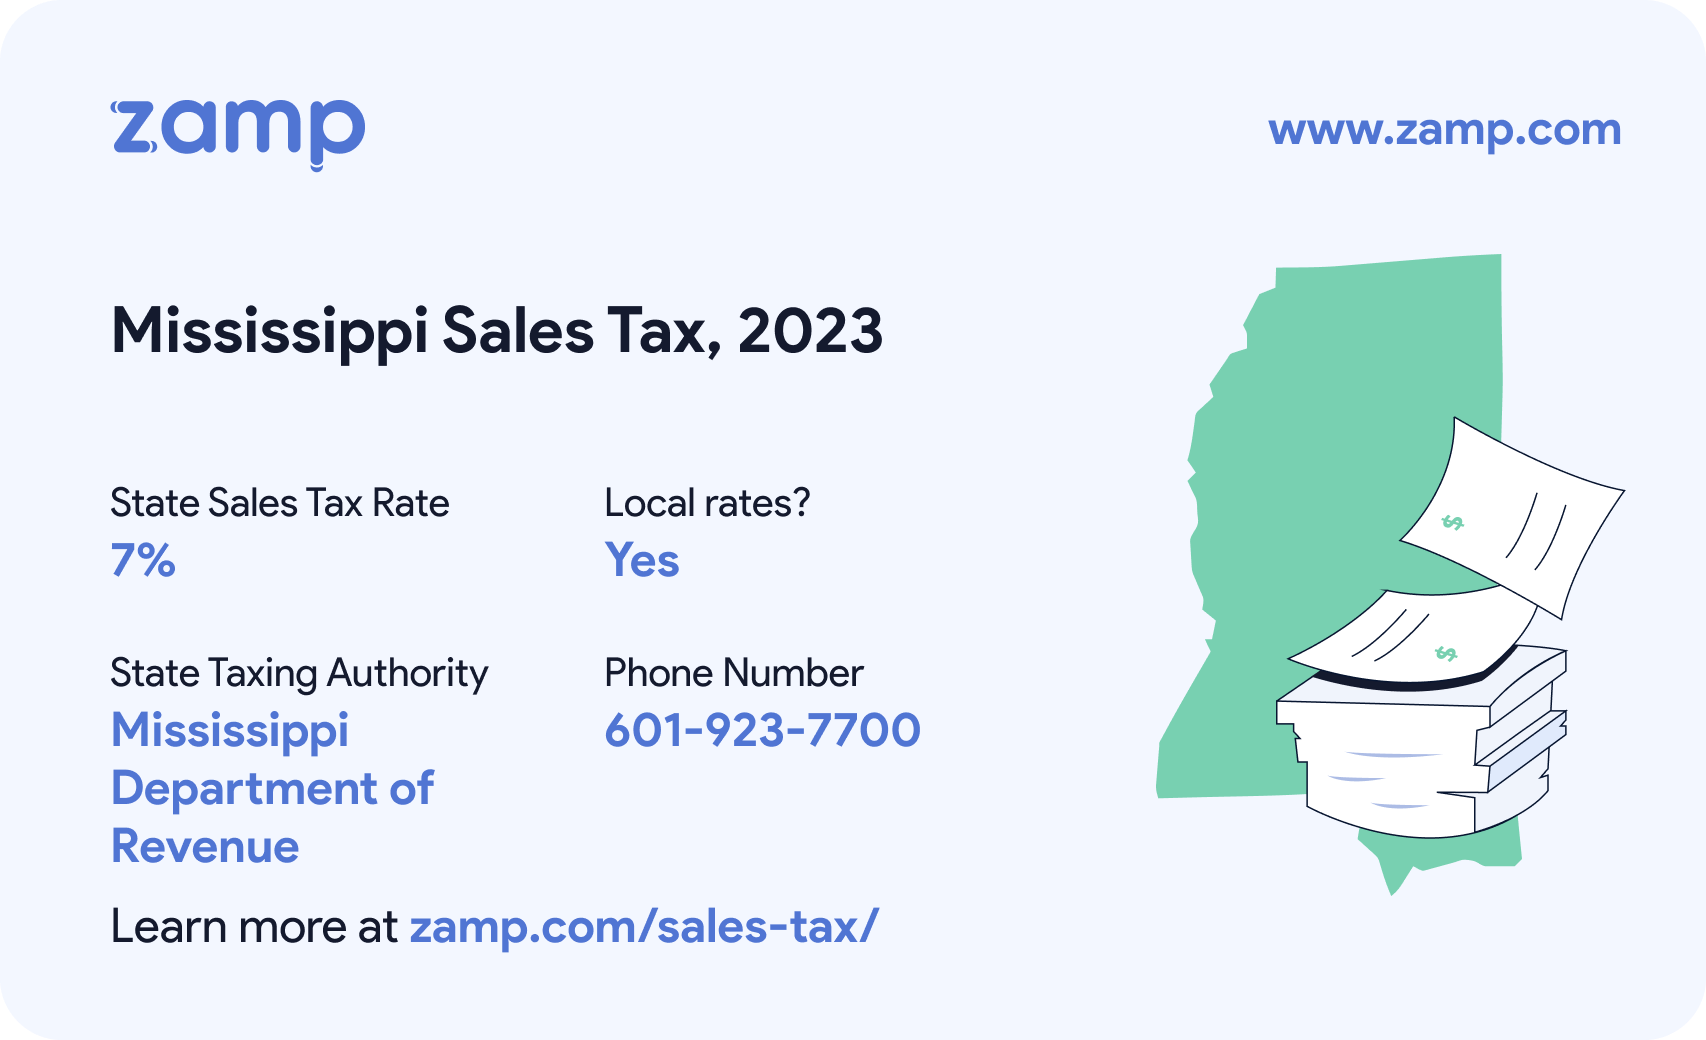 Mississippi basic sales tax info for 2023 - State sales tax rate: 7%, Local rates? Yes; State Taxing Authority: Mississippi Department of Revenue; and phone number 601-923-7700